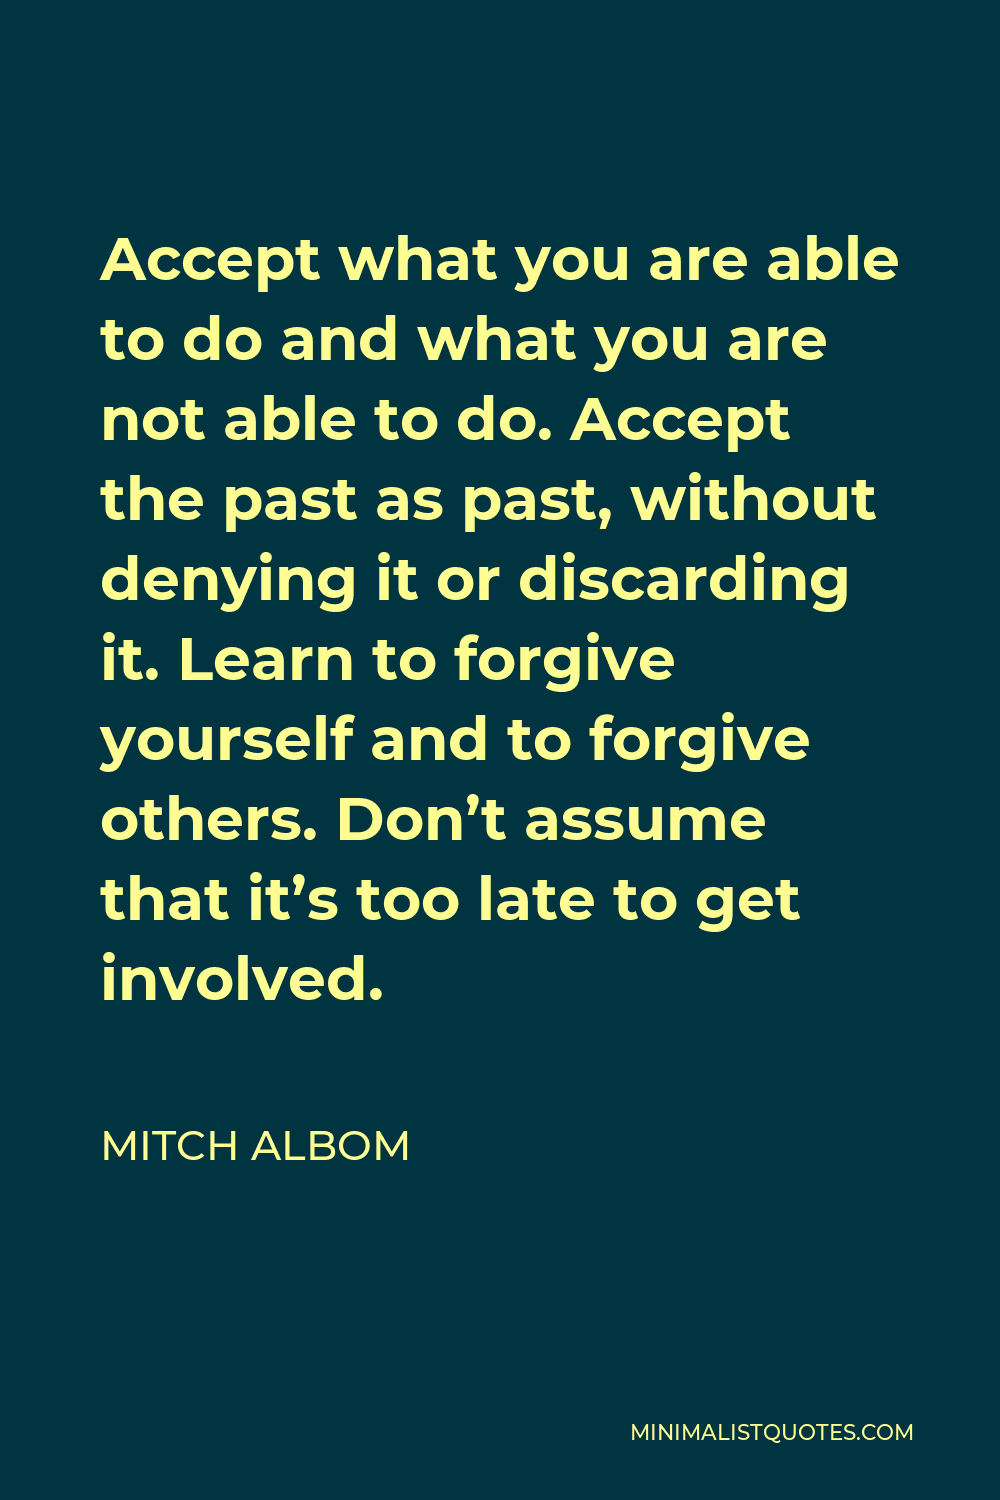 Mitch Albom Quote - Accept what you are able to do and what you are not able to do. Accept the past as past, without denying it or discarding it. Learn to forgive yourself and to forgive others. Don’t assume that it’s too late to get involved.